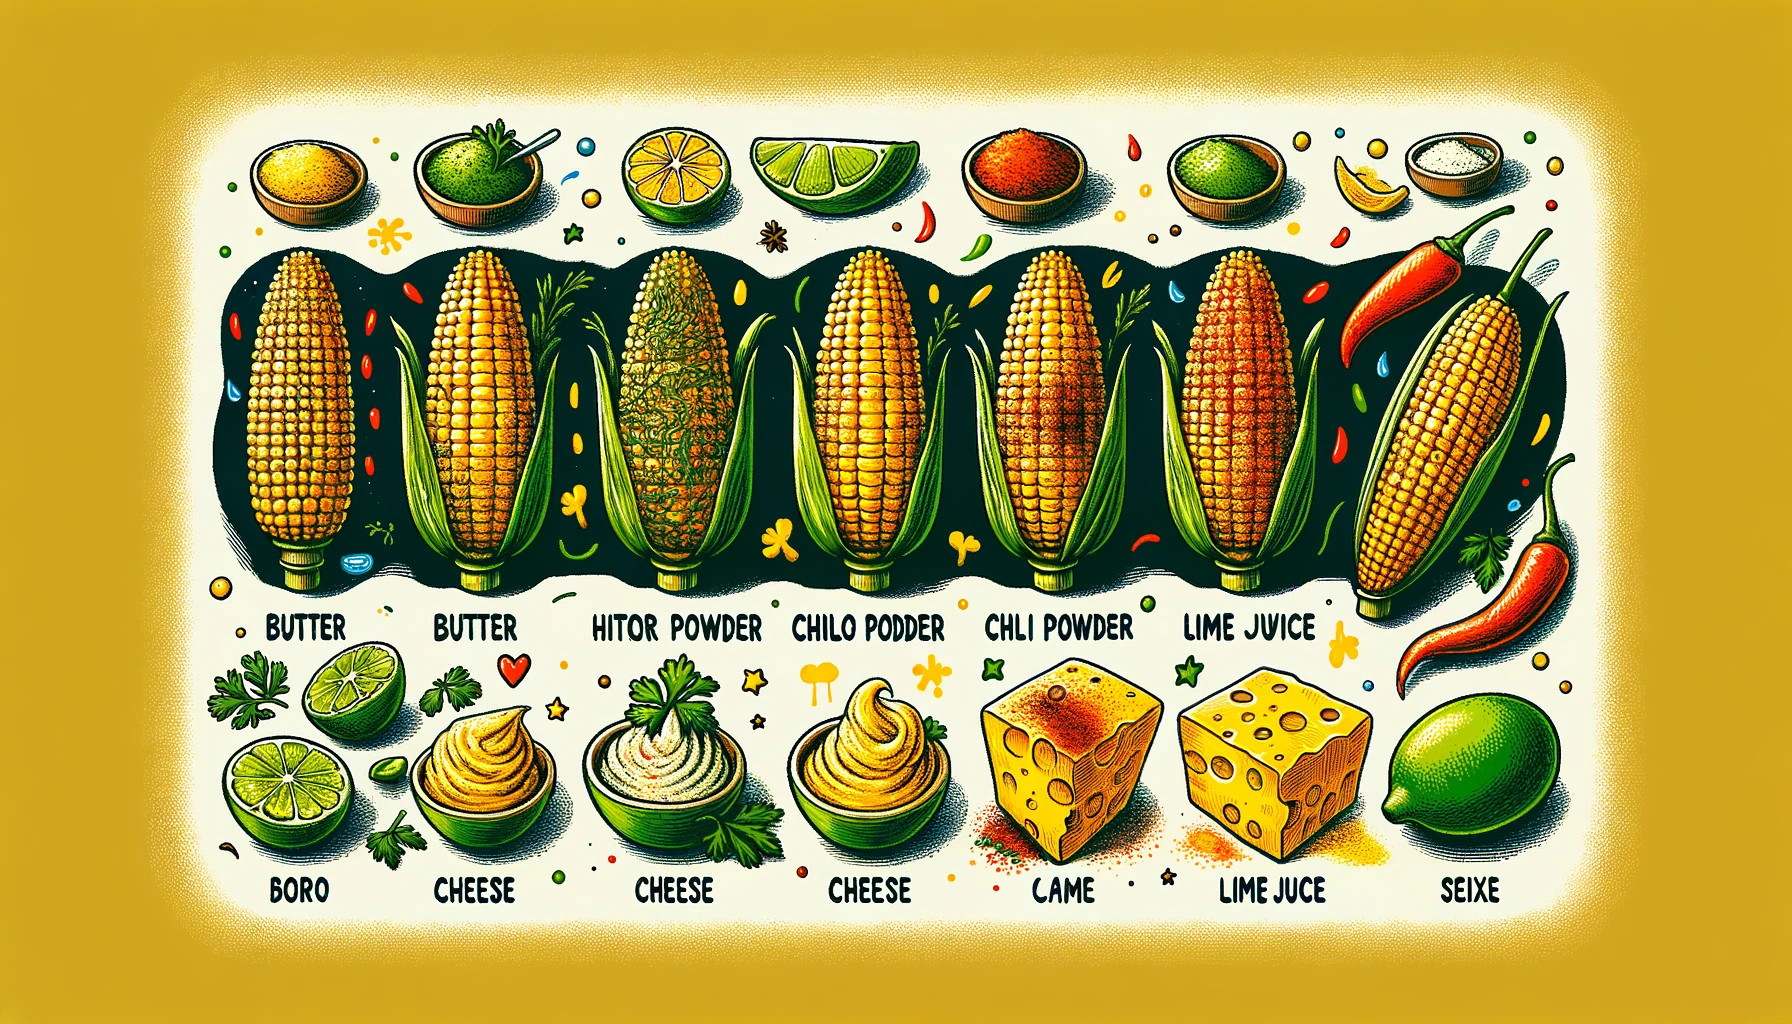 An illustrated guide showing various healthy toppings for corn on the cob.